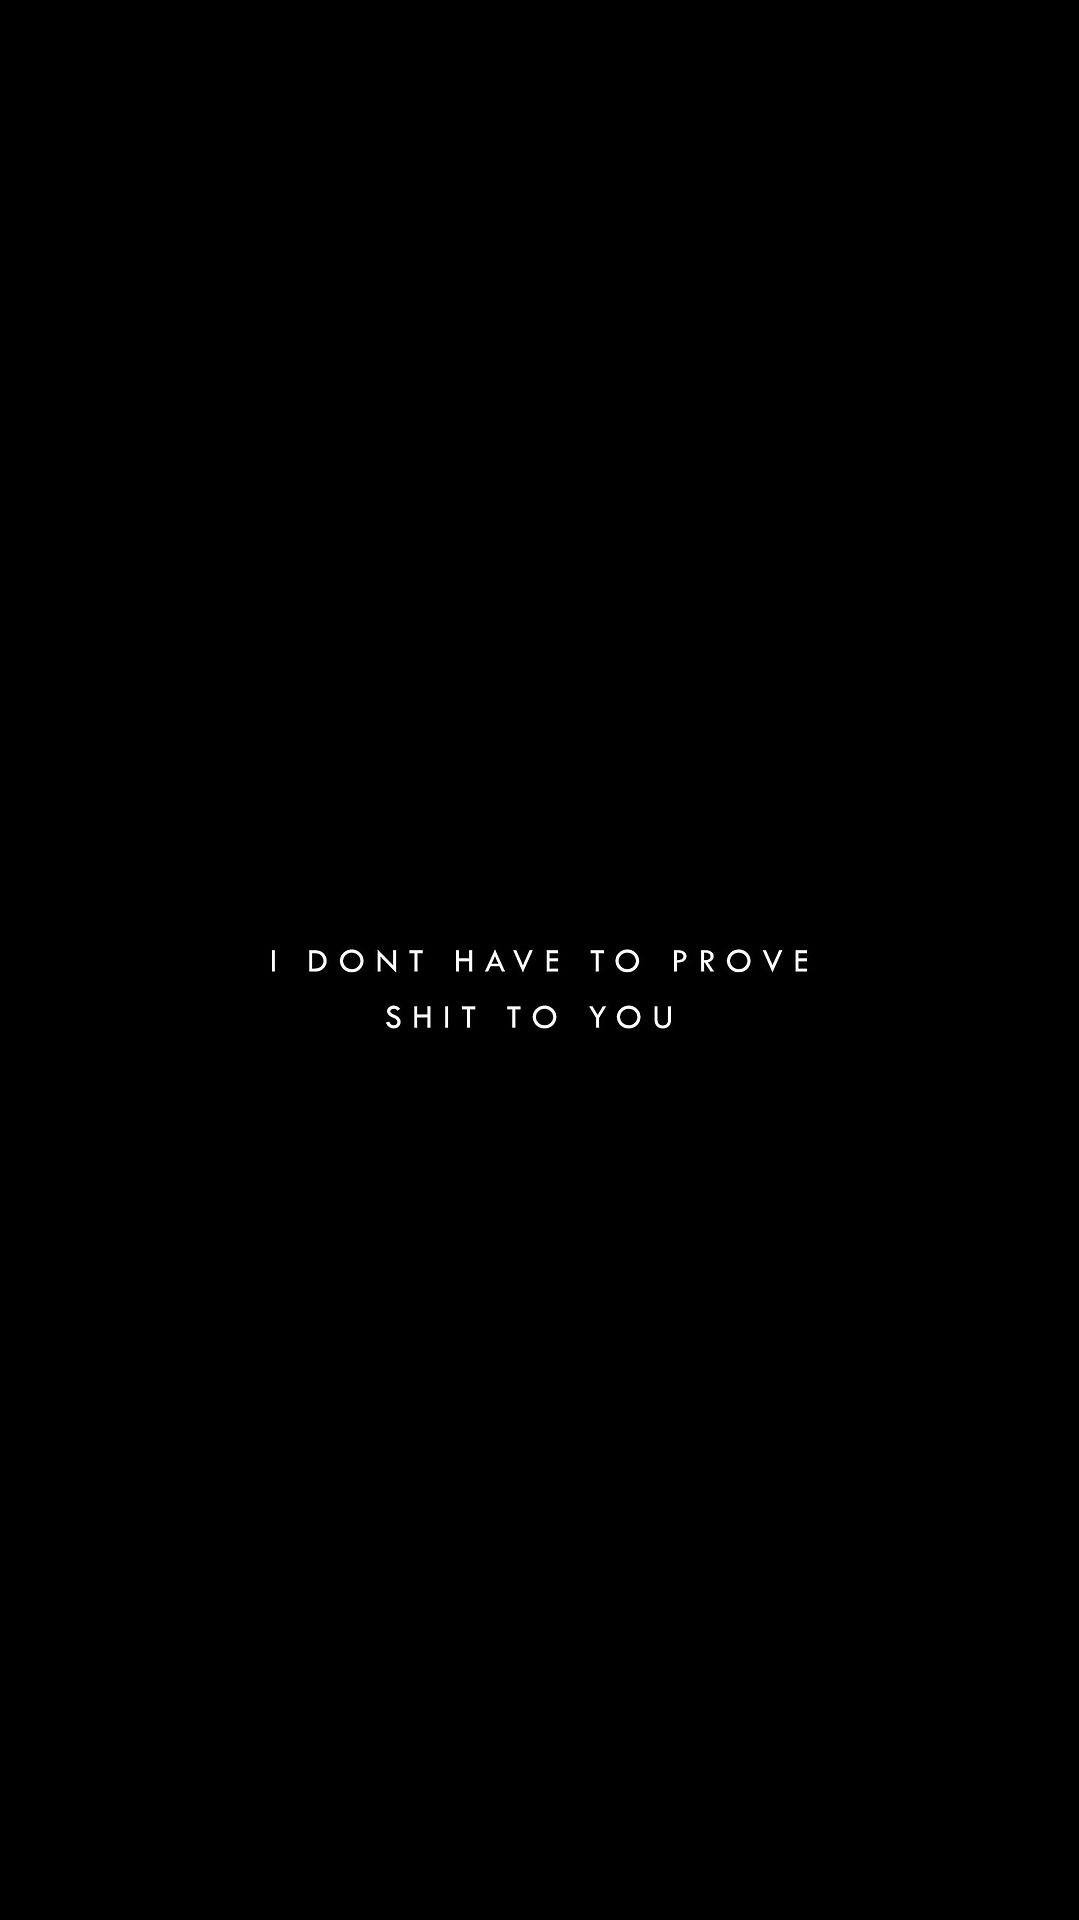 I Dont Have To Prove To You